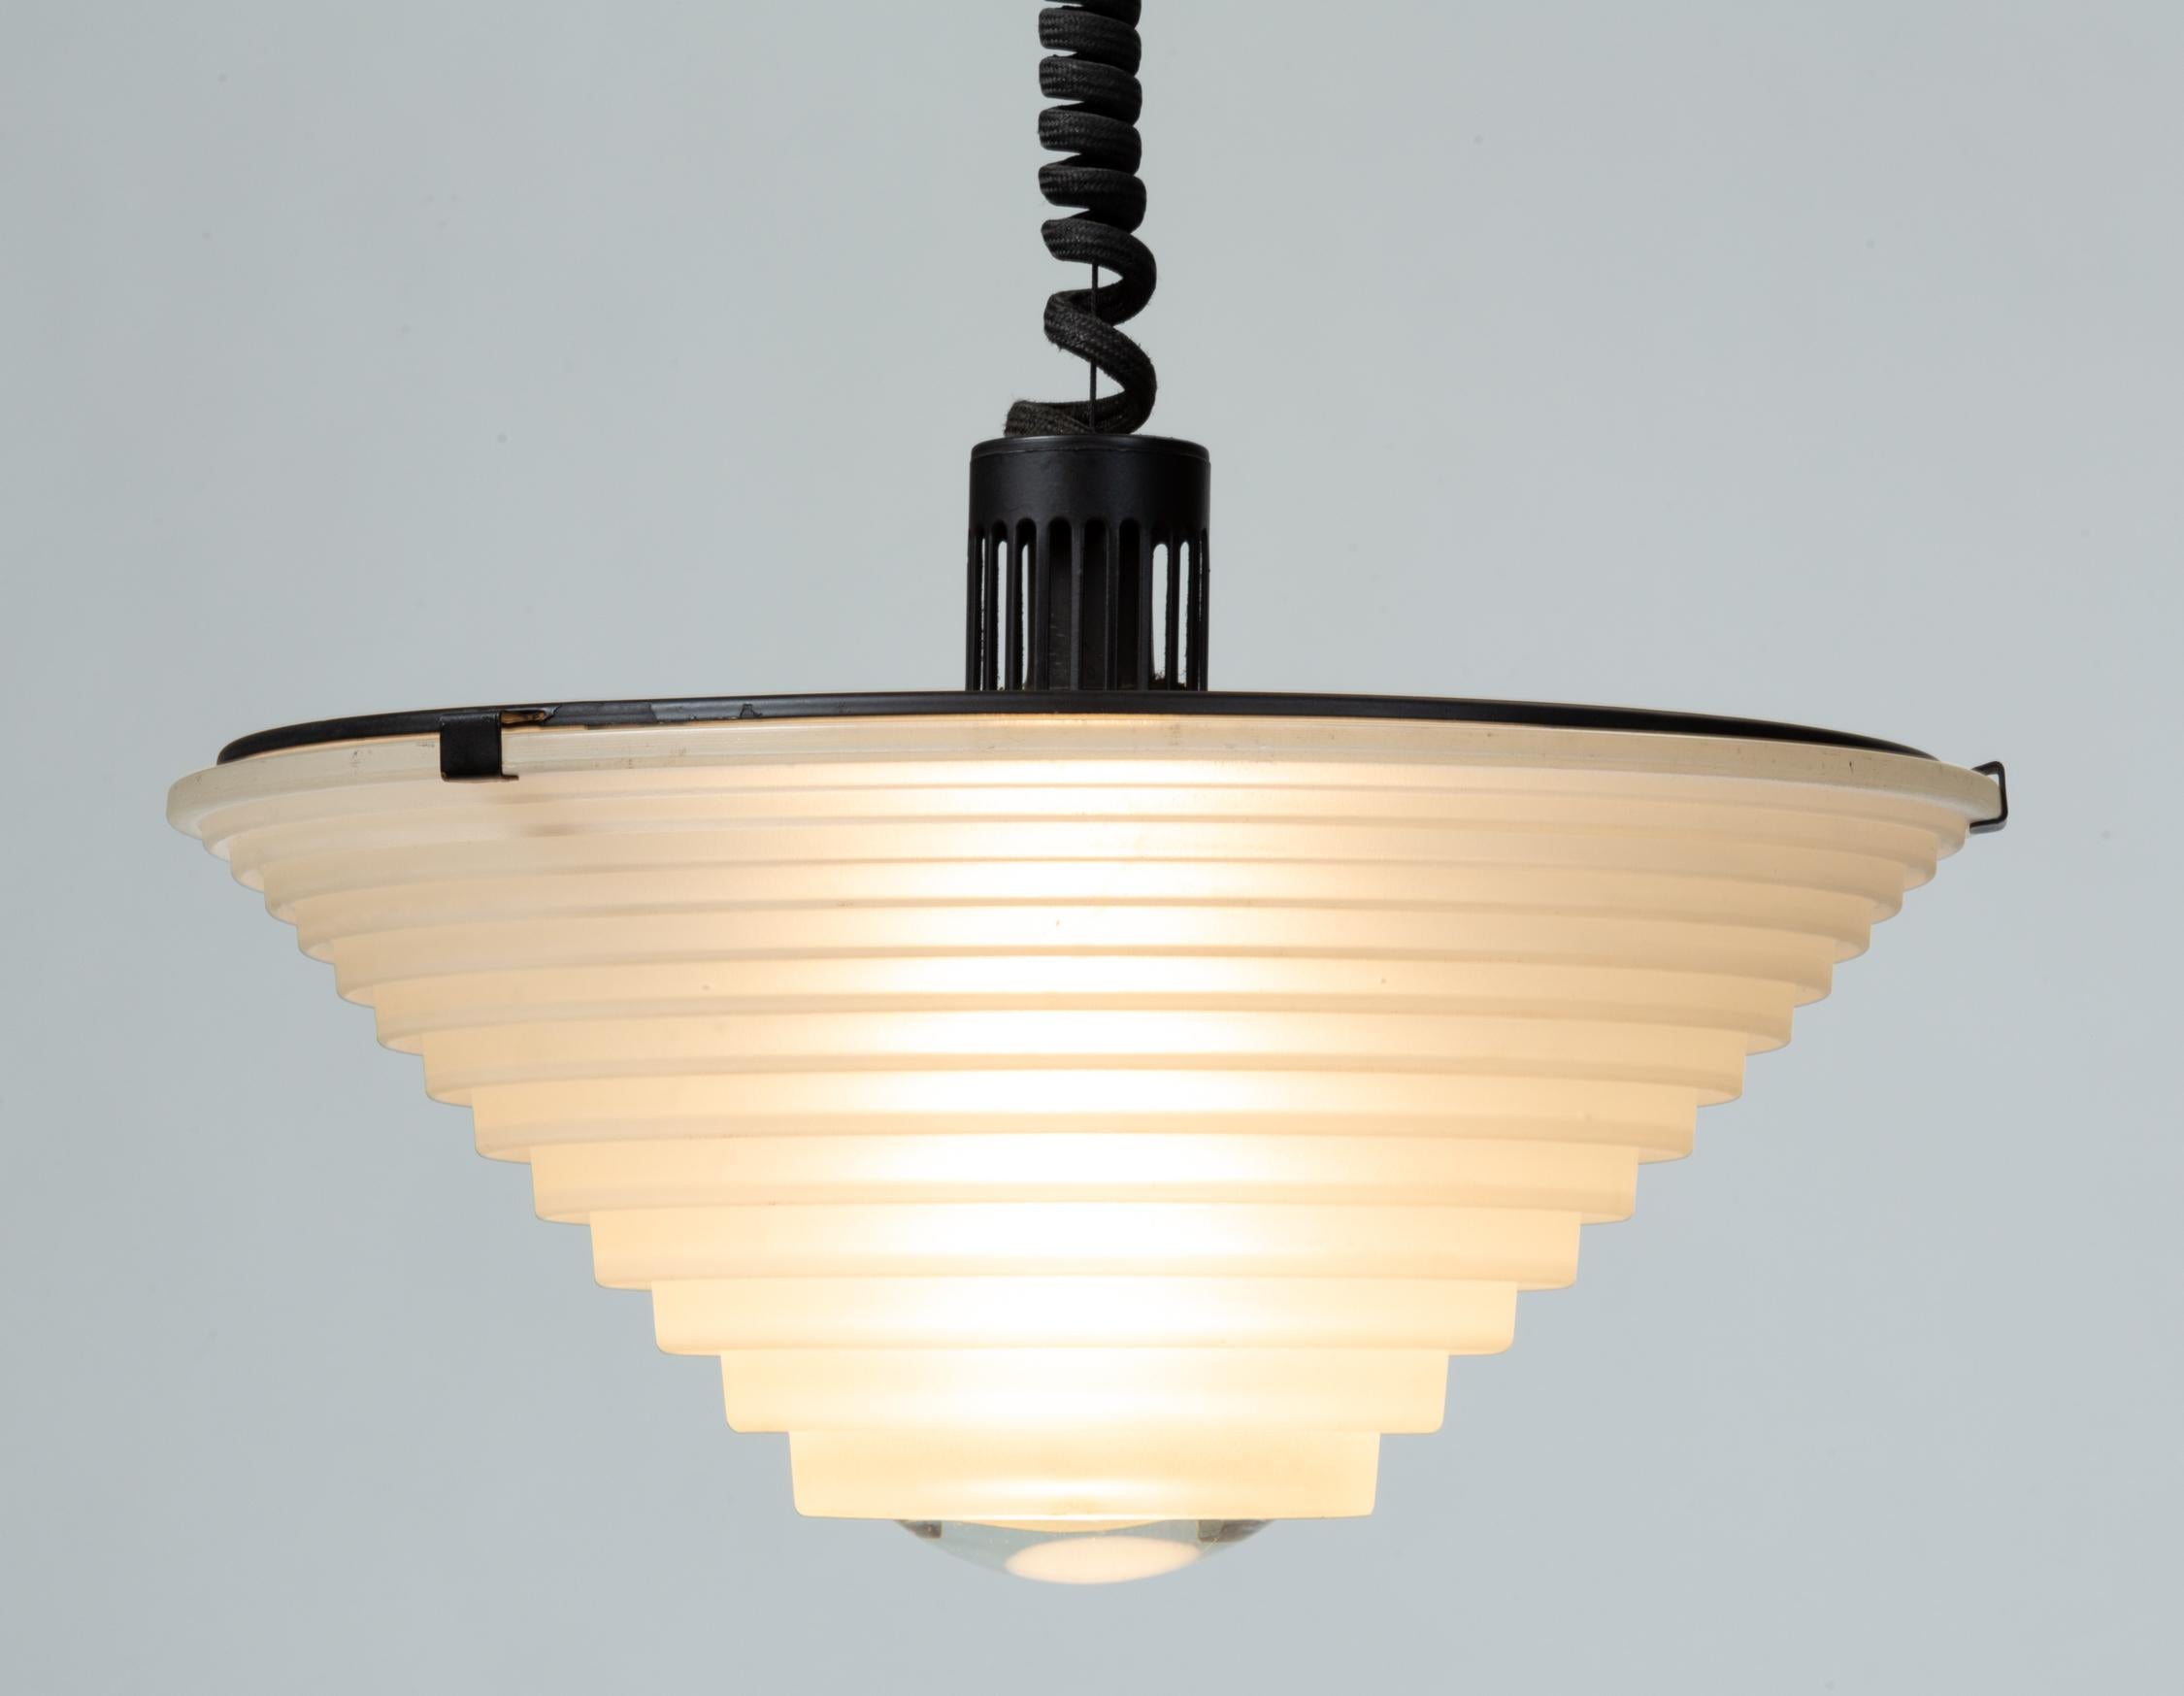 A consummate example of late 1970s “high tech” or “matte black” design that folded together rich stylistic flourishes with utilitarian or industrial materials, the “Egina 38” pendant lamp by Angelo Mangiarotti for Artemide features a stepped glass